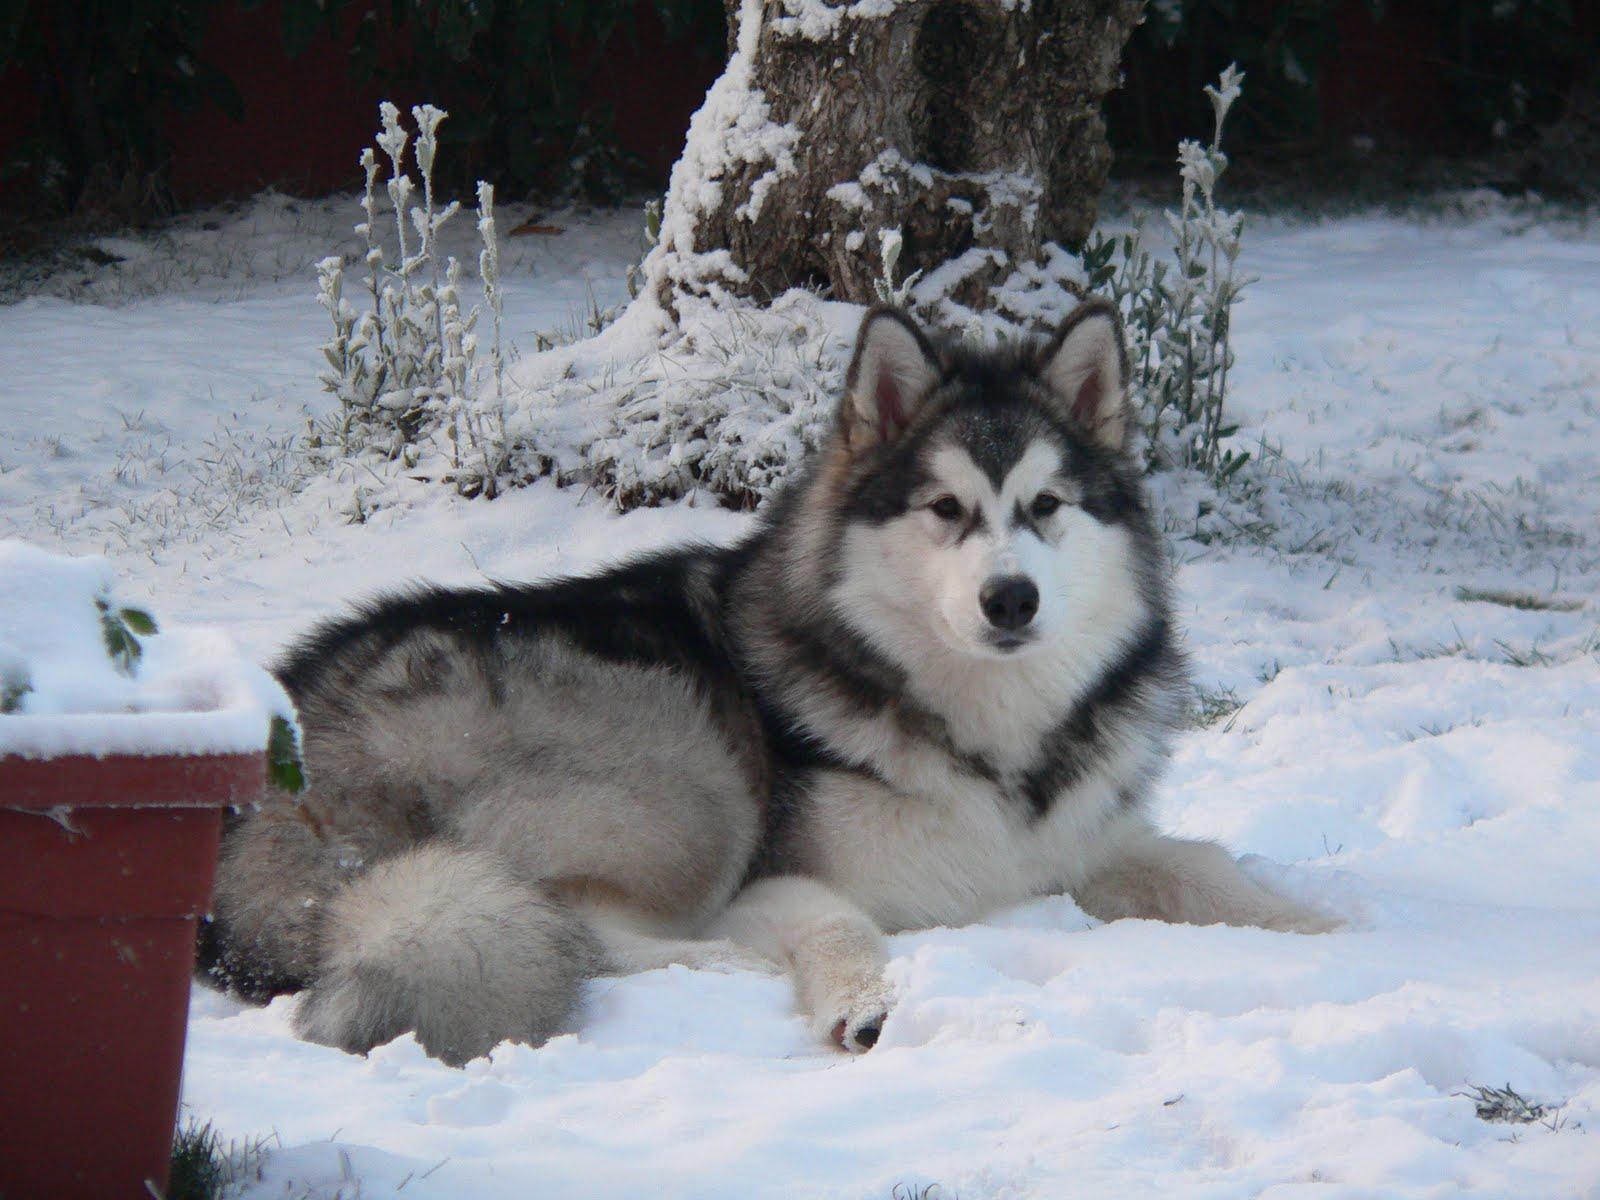 Alaskan Malamute in the winter forest photo and wallpaper